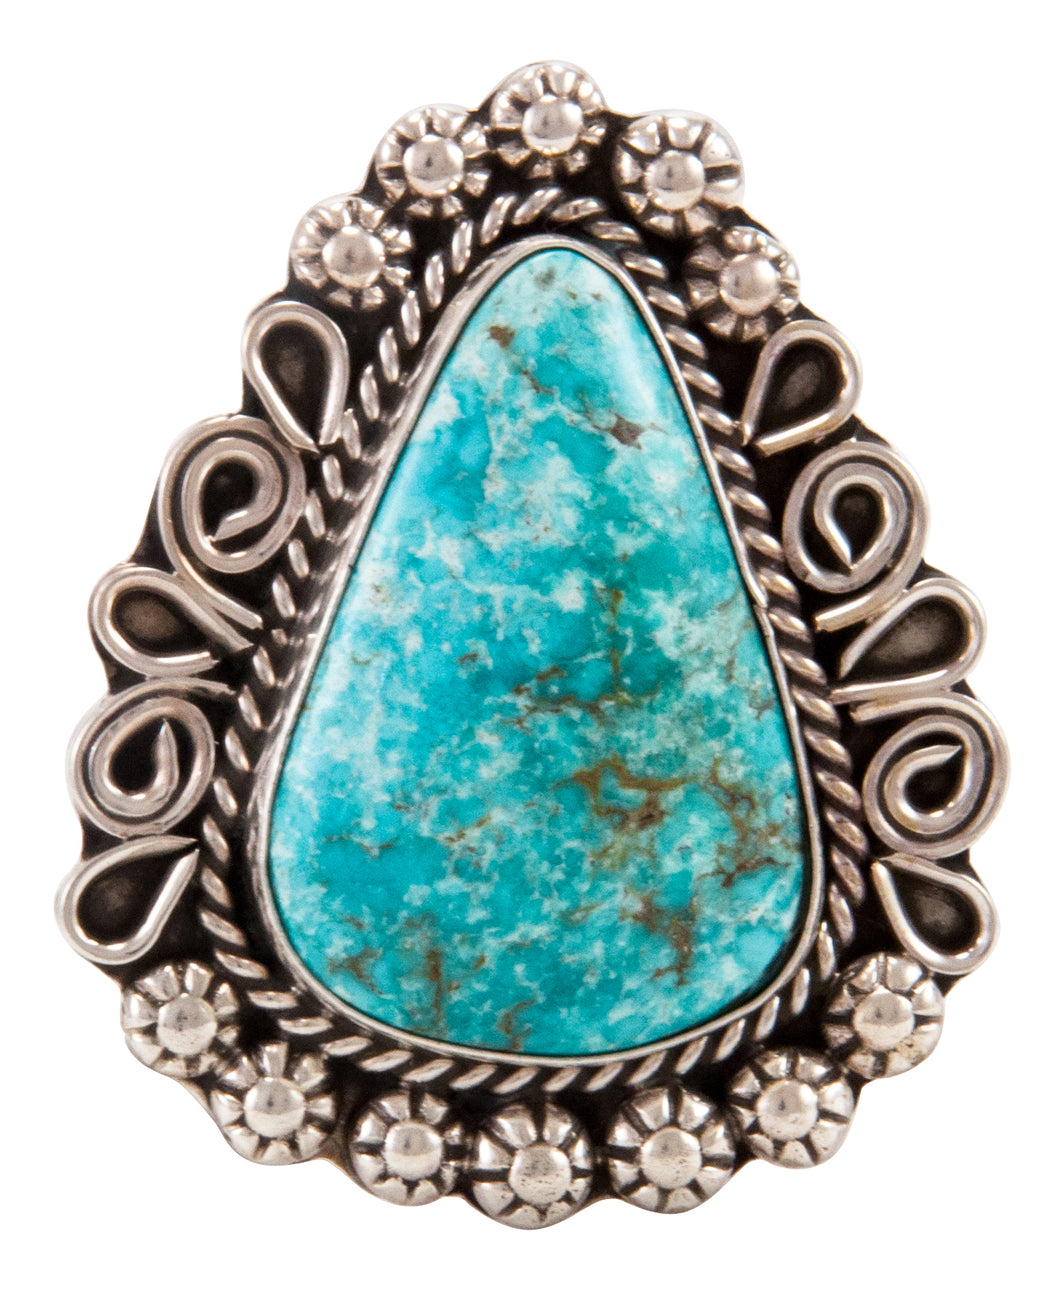 Navajo Native American Candelaria Turquoise Ring Size 9 1/2 by Lee SKU232967